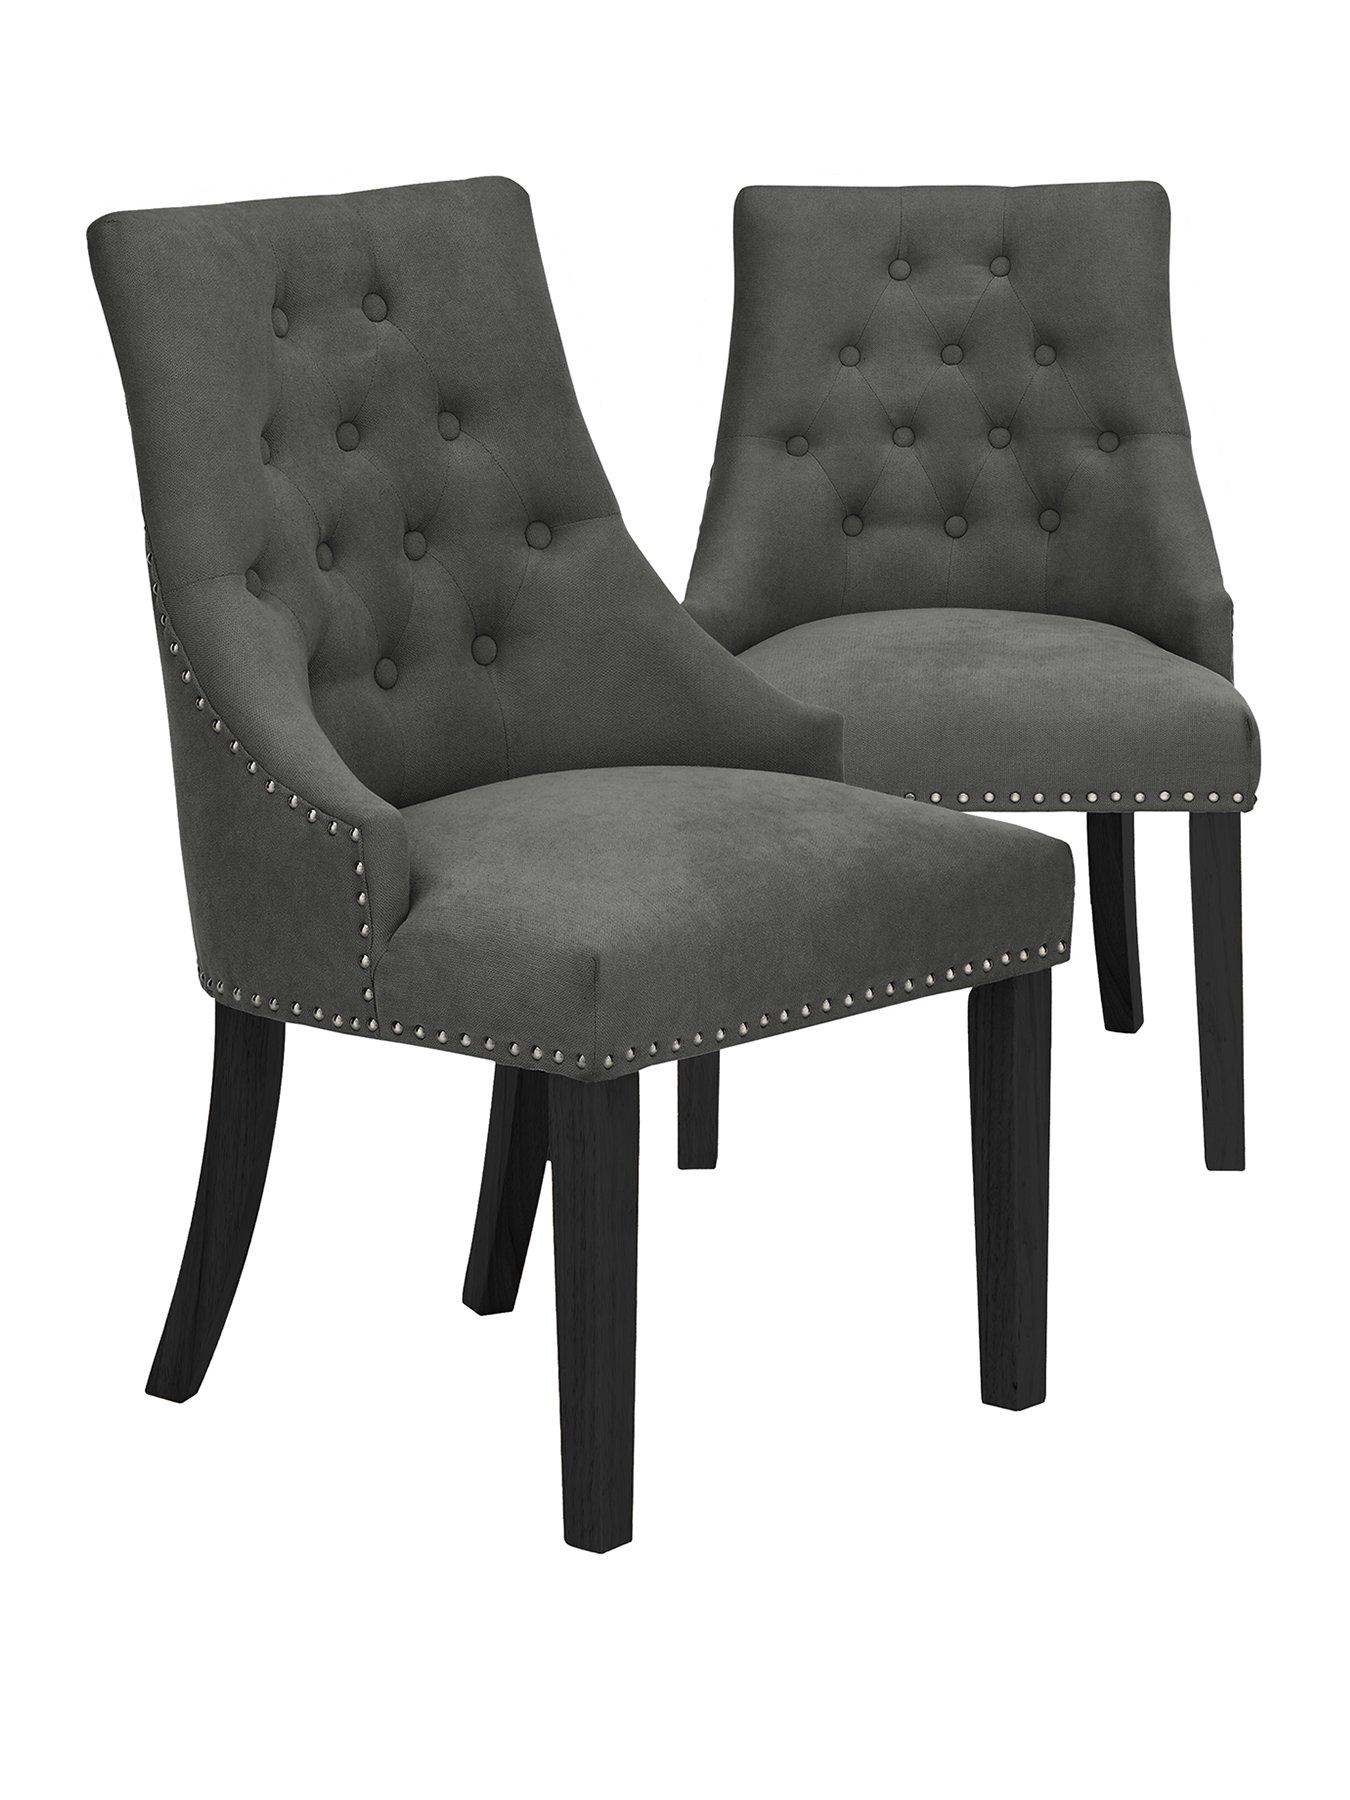 Dining Chairs | Dining Chair Sets | Fabric & Padded | Very.co.uk